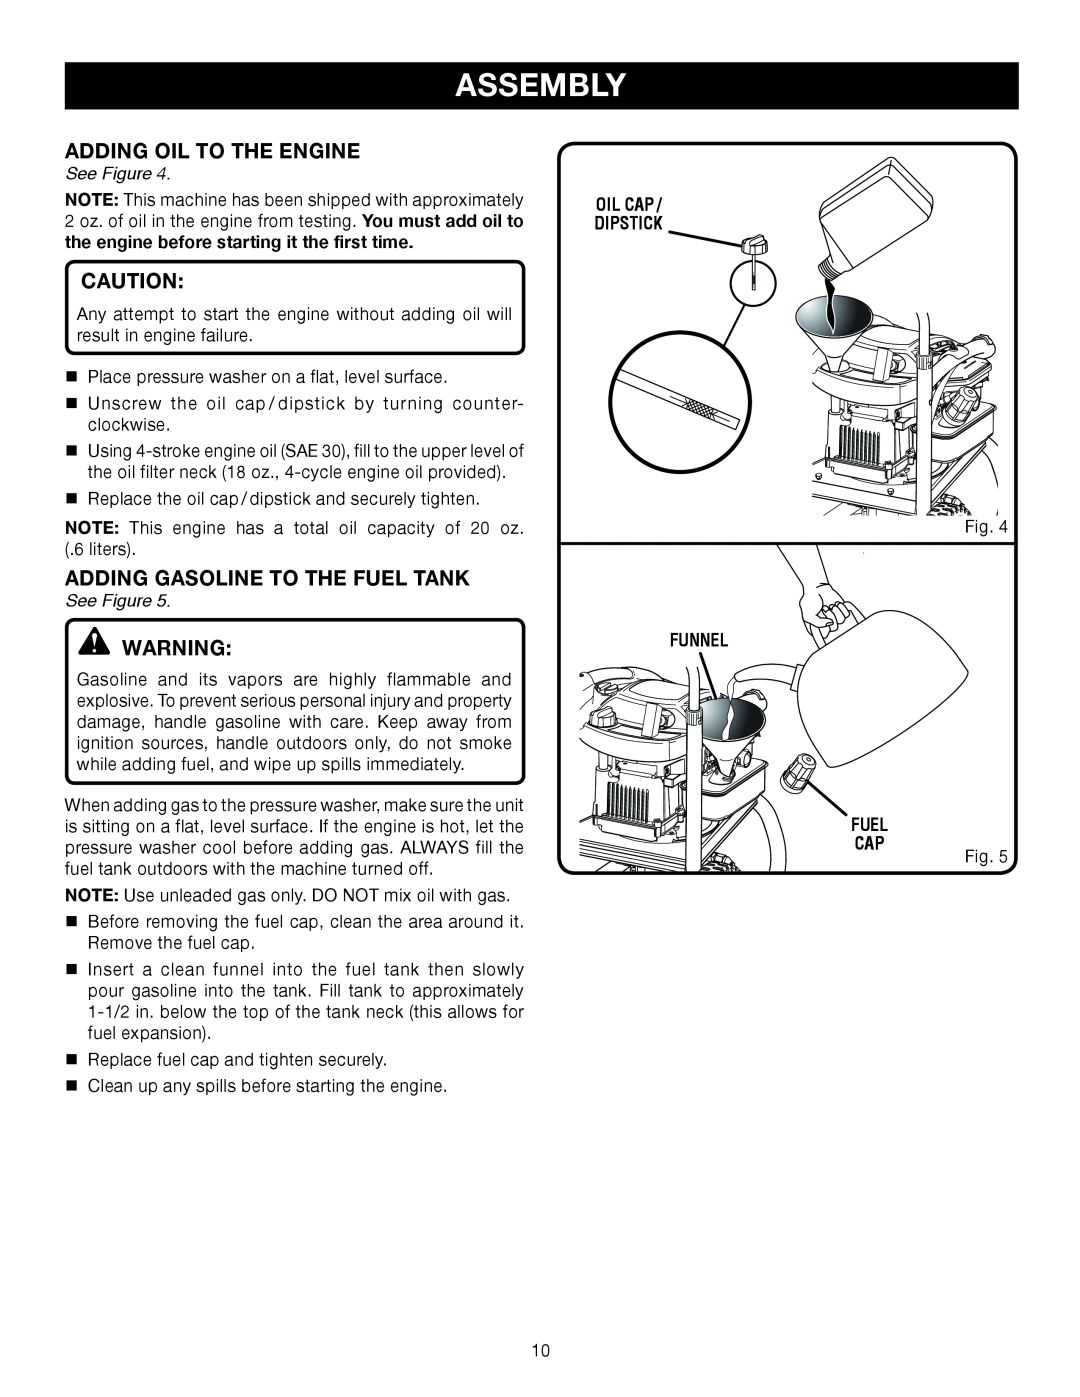 Briggs & Stratton HU80931 Adding Oil To The Engine, Adding Gasoline To The Fuel Tank, Assembly, See Figure, Funnel Fuel 